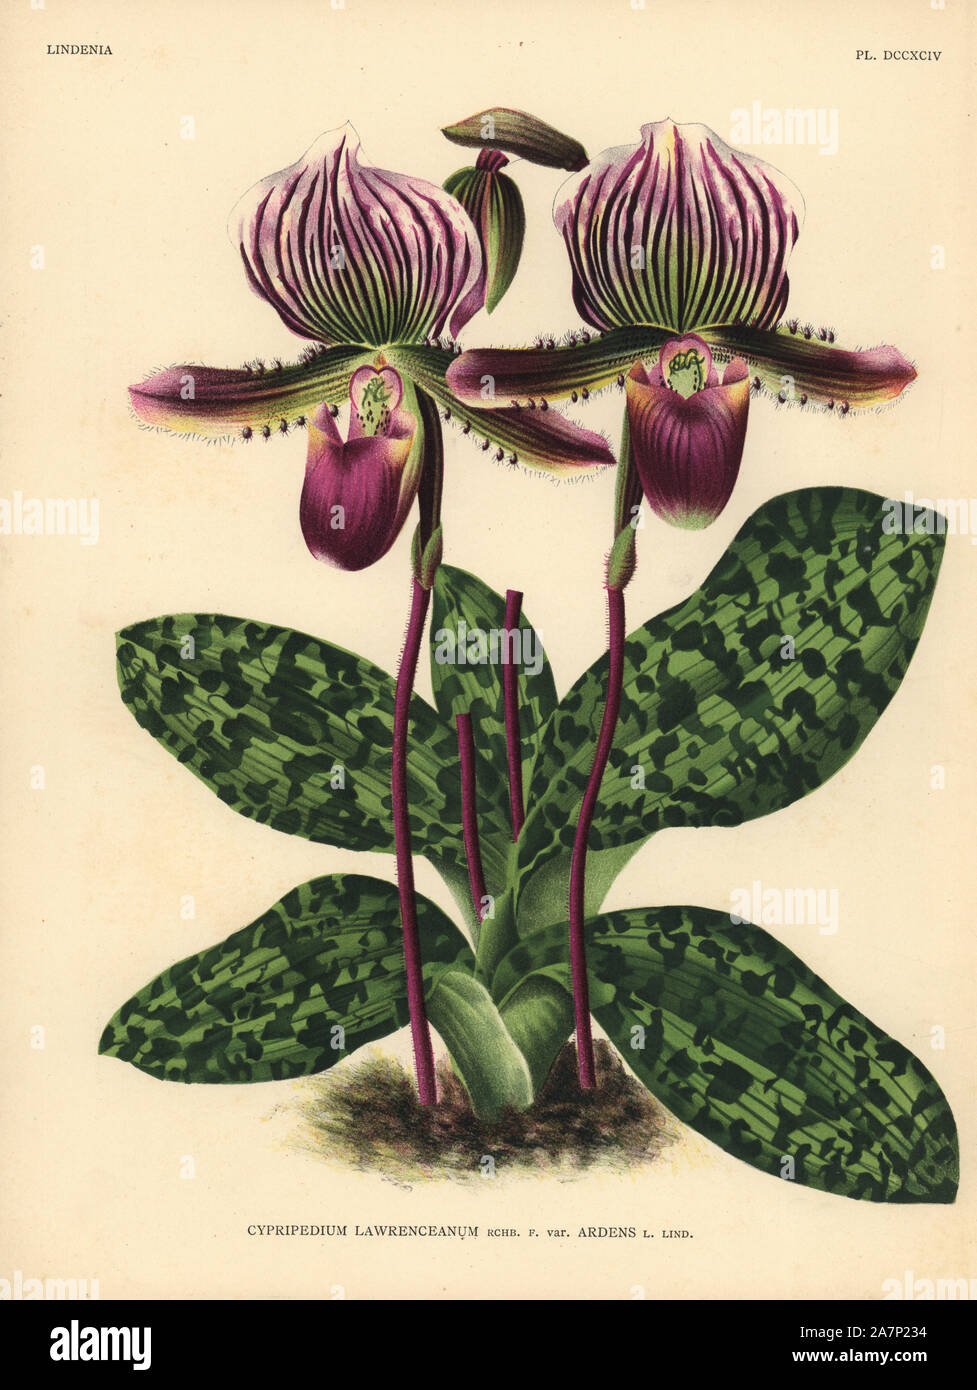 Sir Trevor Lawrence's Cypripedium orchid. Botanical illustration in chromolithograph from Lucien Linden's 'Lindenia, Iconographie des Orchidees,' Brussels, 1903. Stock Photo